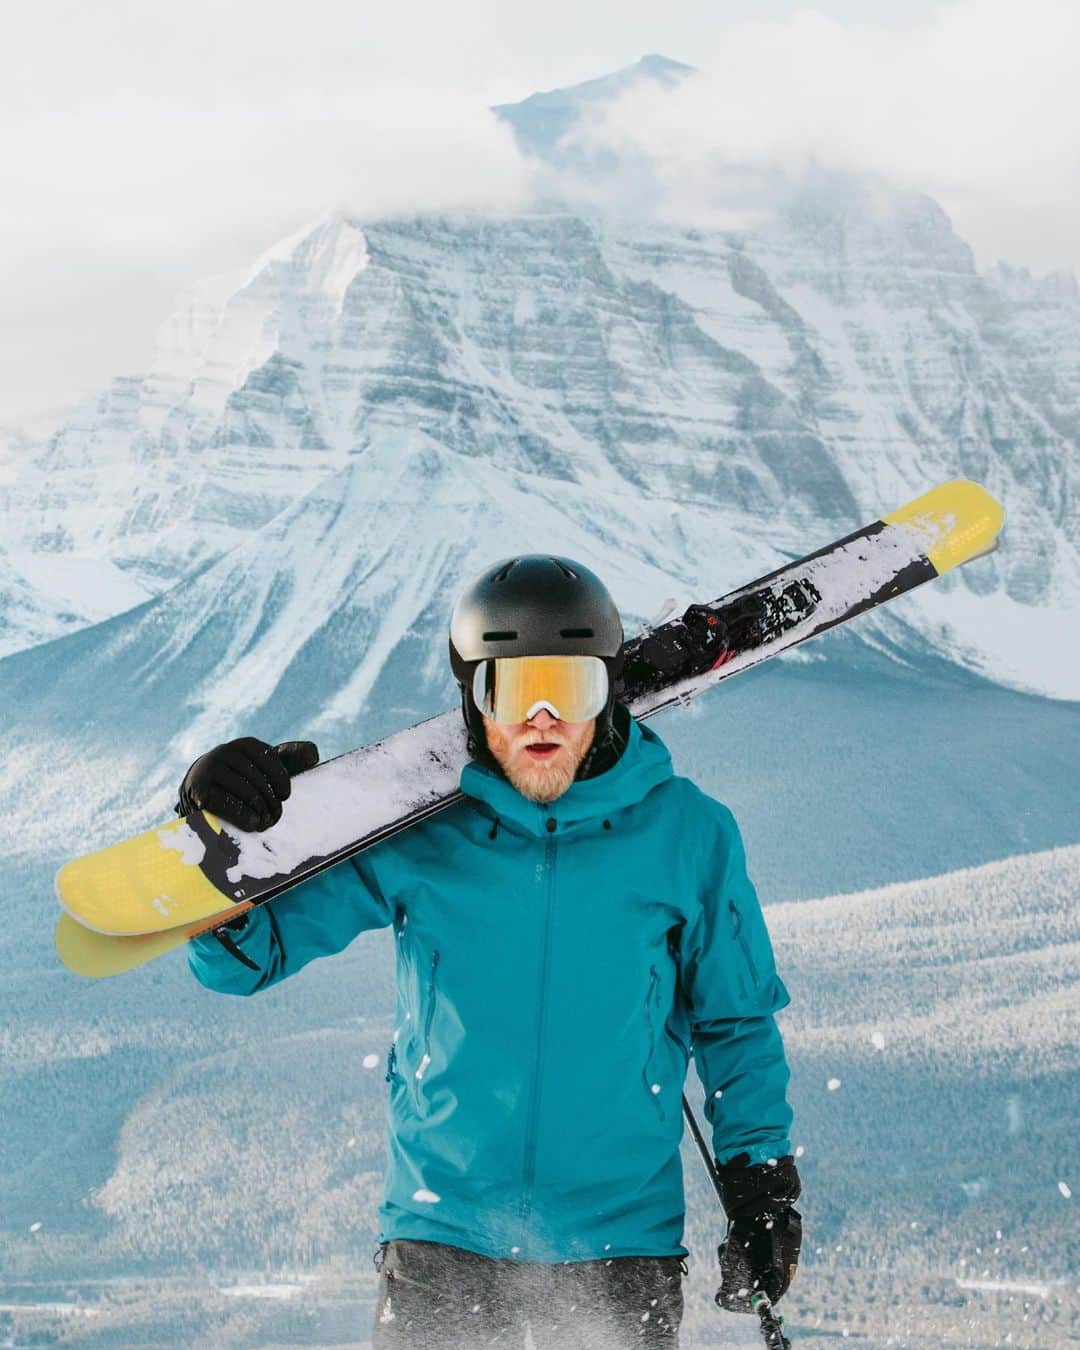 Explore Canadaさんのインスタグラム写真 - (Explore CanadaInstagram)「Today’s #CanadaSpotlight is on skiing and snowboarding in Canada!⁠⠀ ⁠⠀ A quintessential Canadian winter activity, skiing serves up some of the best ways to access unforgettable views, pristine nature and of course the opportunity to glide down some of Canada’s most iconic mountains! Whether you're a seasoned skier or just getting started you can always find a diverse set of runs or a friendly instructor that will make your time amazing while up on the hill. Here are the incredible places you can ski in Canada:⁠⠀ ⁠⠀ 🏔️ British Columbia - With 13 major resorts spread out over 10 mountain ranges, British Columbia is a skiers dream come true. Seeking adventure? Look no further than North America’s largest ski resort, Whistler Blackcomb. What about knee-deep powder? Find it on the slopes of Fernie Alpine Resort right on the edge of the Rockies.⁠⠀ ⁠⠀ 🏂 Alberta - For a taste of Alberta’s 30-plus ski resorts your best bet is to head to the Rocky Mountains. Here you’ll find satisfyingly long peak-to-base runs with lots of cozy and quaint mountain towns filled with some very friendly people. ⁠⠀ ⁠⠀ ❄️ Ontario - A quick drive away from Toronto (1.5 hrs) you’ll find Ontario’s largest ski resort, Blue Mountain Resort. The family friendly destination delivers 363 acres of skiable terrain throughout the resort’s diverse range of runs. ⁠⠀ ⁠⠀ 🎿 Quebec - With 10 ski resorts across three regions, Quebec makes it tough to choose which slopes to hit while on a ski trip. Tremblant, a short drive away from Montreal (2 hour drive) offers over 100 different trails to explore and consistently ranks as the number one ski resort in the east in SKI Magazine.⁠⠀ ⁠⠀ What’s your favourite ski resort in Canada? Let us know in the comments and don’t forget to hit the ‘save’ icon to easily refer back to this post and inspire future trips!⁠⠀ ⁠⠀ #WinterisDeeper #ExploreCanada #CanadaNice⁠⠀ ⁠⠀ *Know before you go! Check the most up-to-date travel restrictions and border closures before planning your trip and if you're travelling in Canada, download the COVID Alert app to your mobile device.*⁠⠀ ⁠⠀ 📷: @mikeseehagel, @blakejorgenson, Adam Stein ⁠⠀ 📍: @skicanadaofficial⁠⠀」12月3日 3時08分 - explorecanada